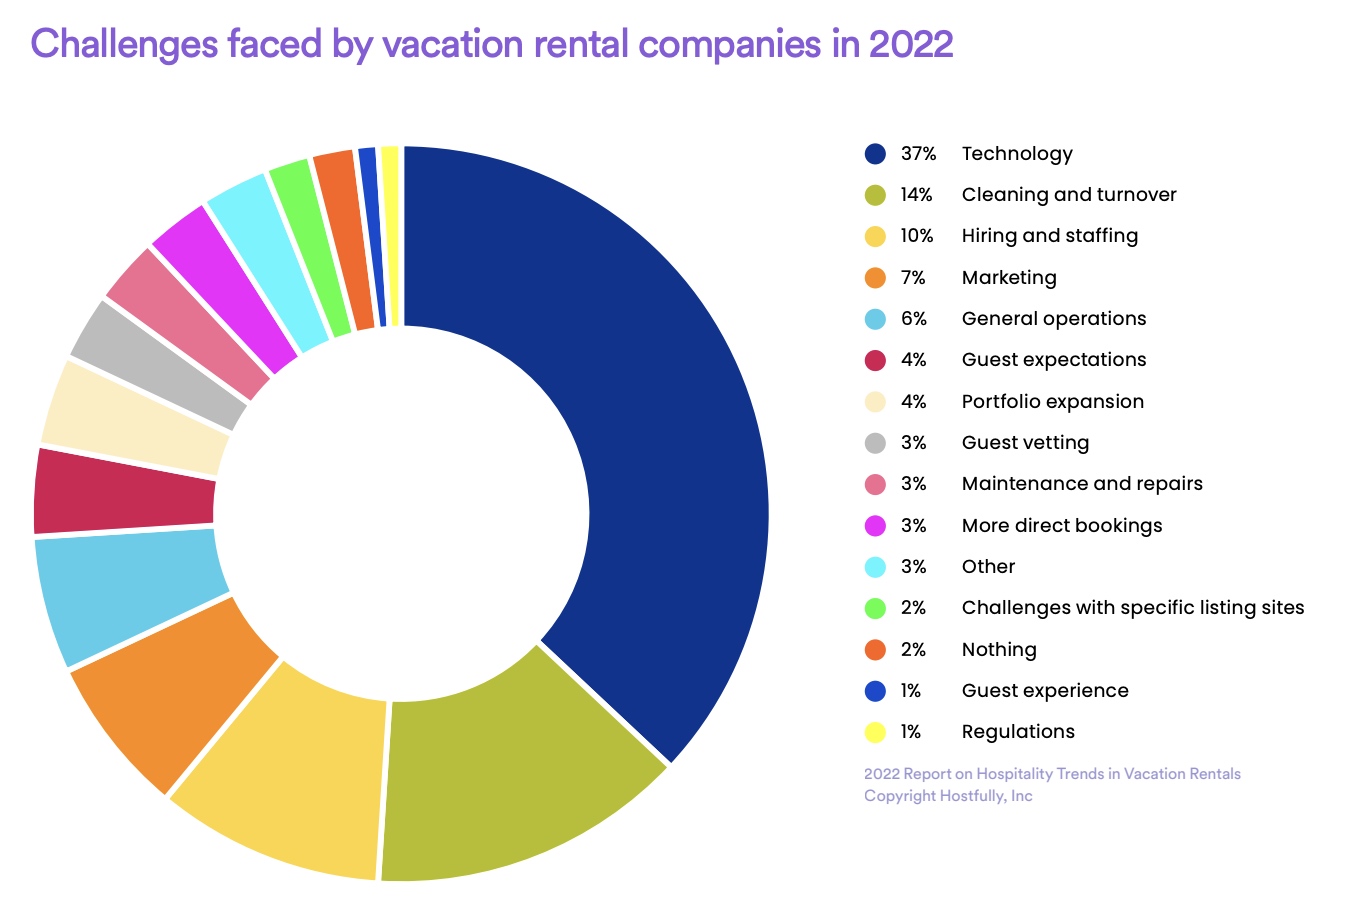 Pie chart showing challenges faced by vacation rental companies in 2022